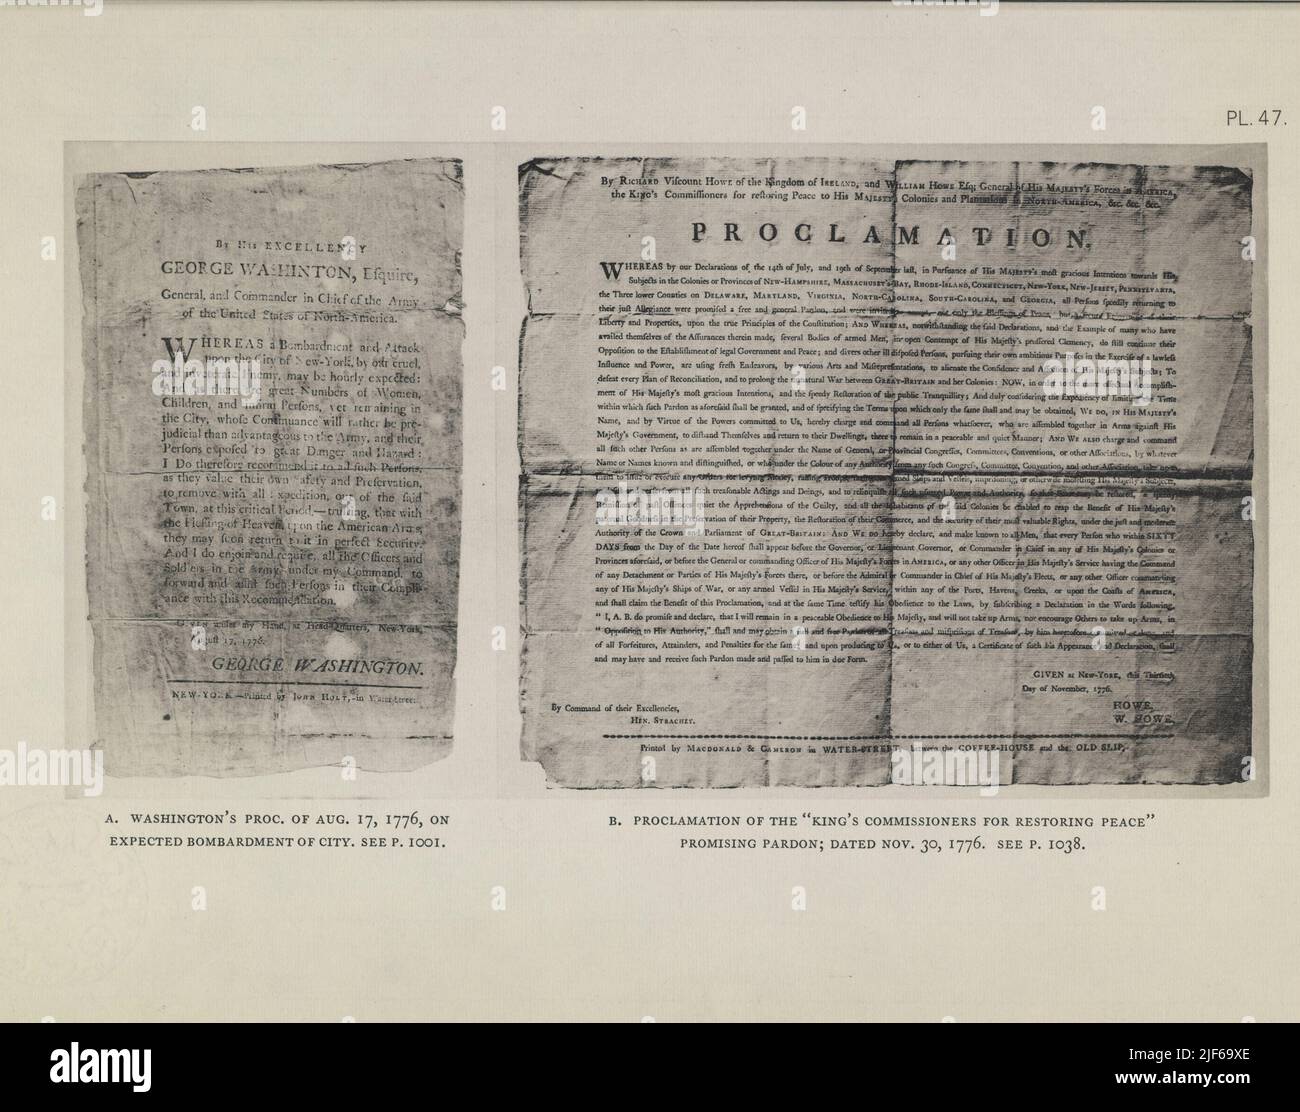 WASHINGTON’S PROCLAMATION OF AUG. 17, 1776, ON THE EXPECTED BOMBARDMENT OF NEW YORK CITY. [Left] PROCLAMATION OF THE “KING'S COMMISSIONERS FOR RE- STORING PEACE’ PROMISING PARDON; DATED NOV. 30, 1776 [Right] from the book  The iconography of Manhattan Island, 1498-1909 compiled from original sources and illustrated by photo-intaglio reproductions of important maps, plans, views, and documents in public and private collections - Volume 5 by Stokes, I. N. Phelps (Isaac Newton Phelps), 1867-1944 Stock Photo